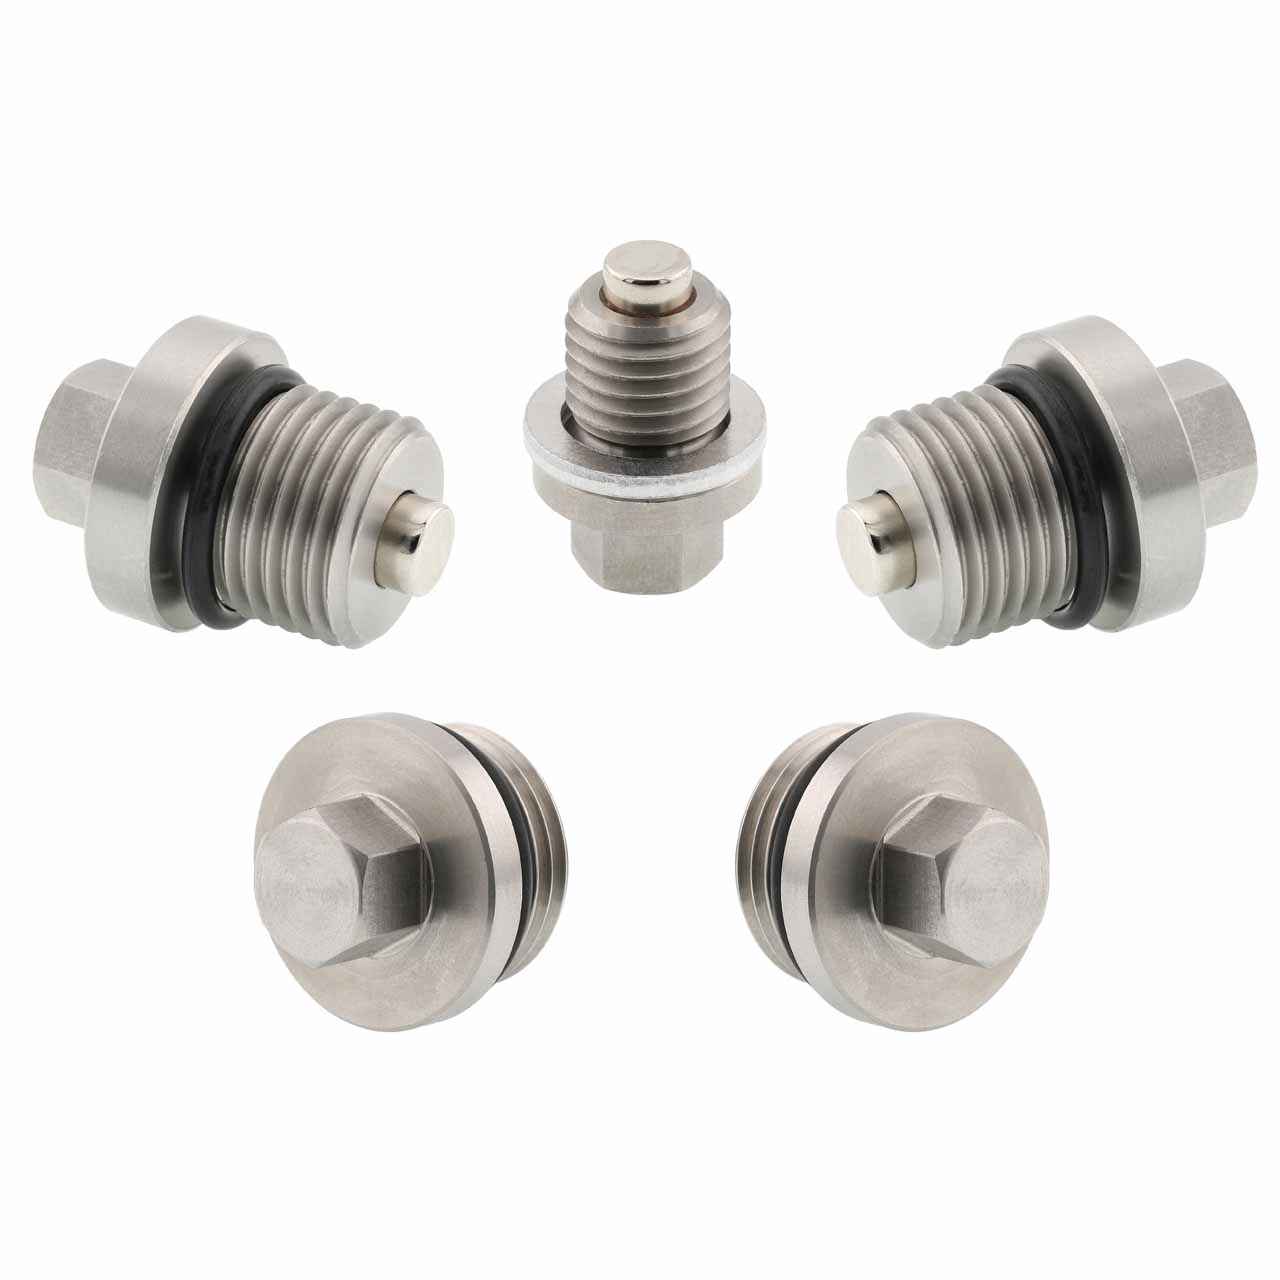 Polaris Ranger 900-6 Crew Magnetic Oil Drain Plug Kit - 2015-2016 - Engine, Transmission, Differential - Made In USA